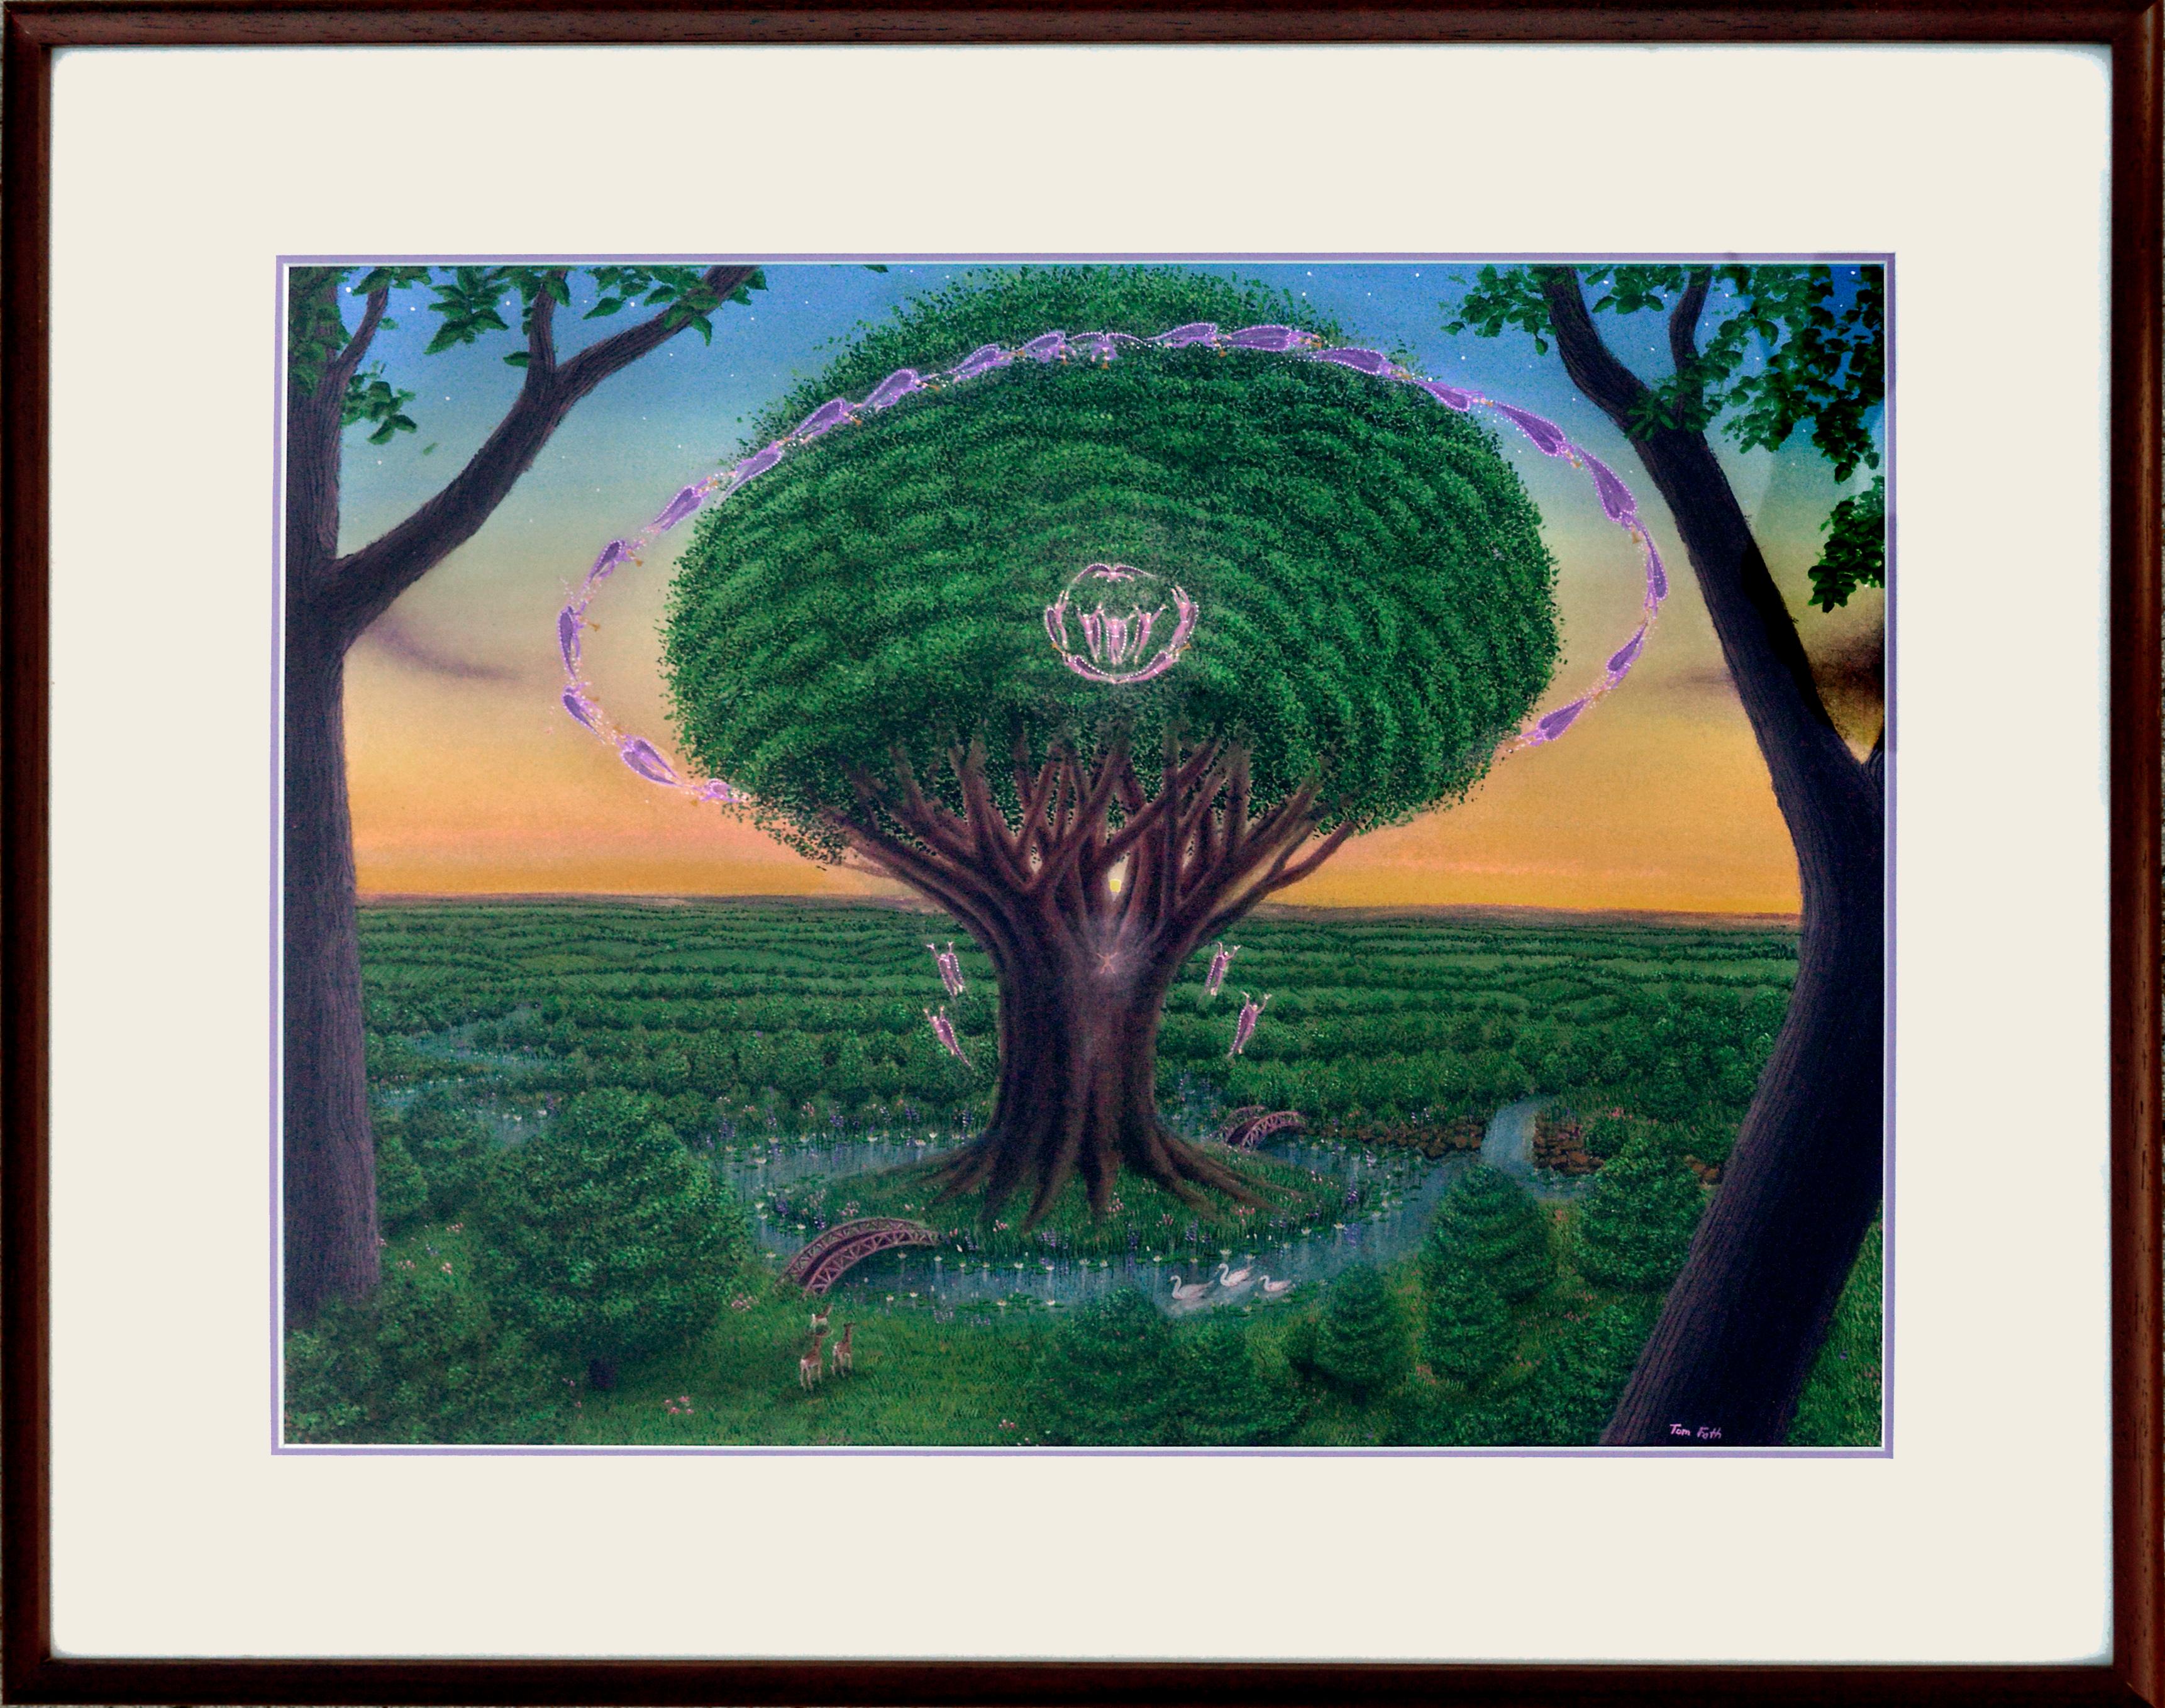 Tree of Life in the Garden - Visionary art by Tom Fath